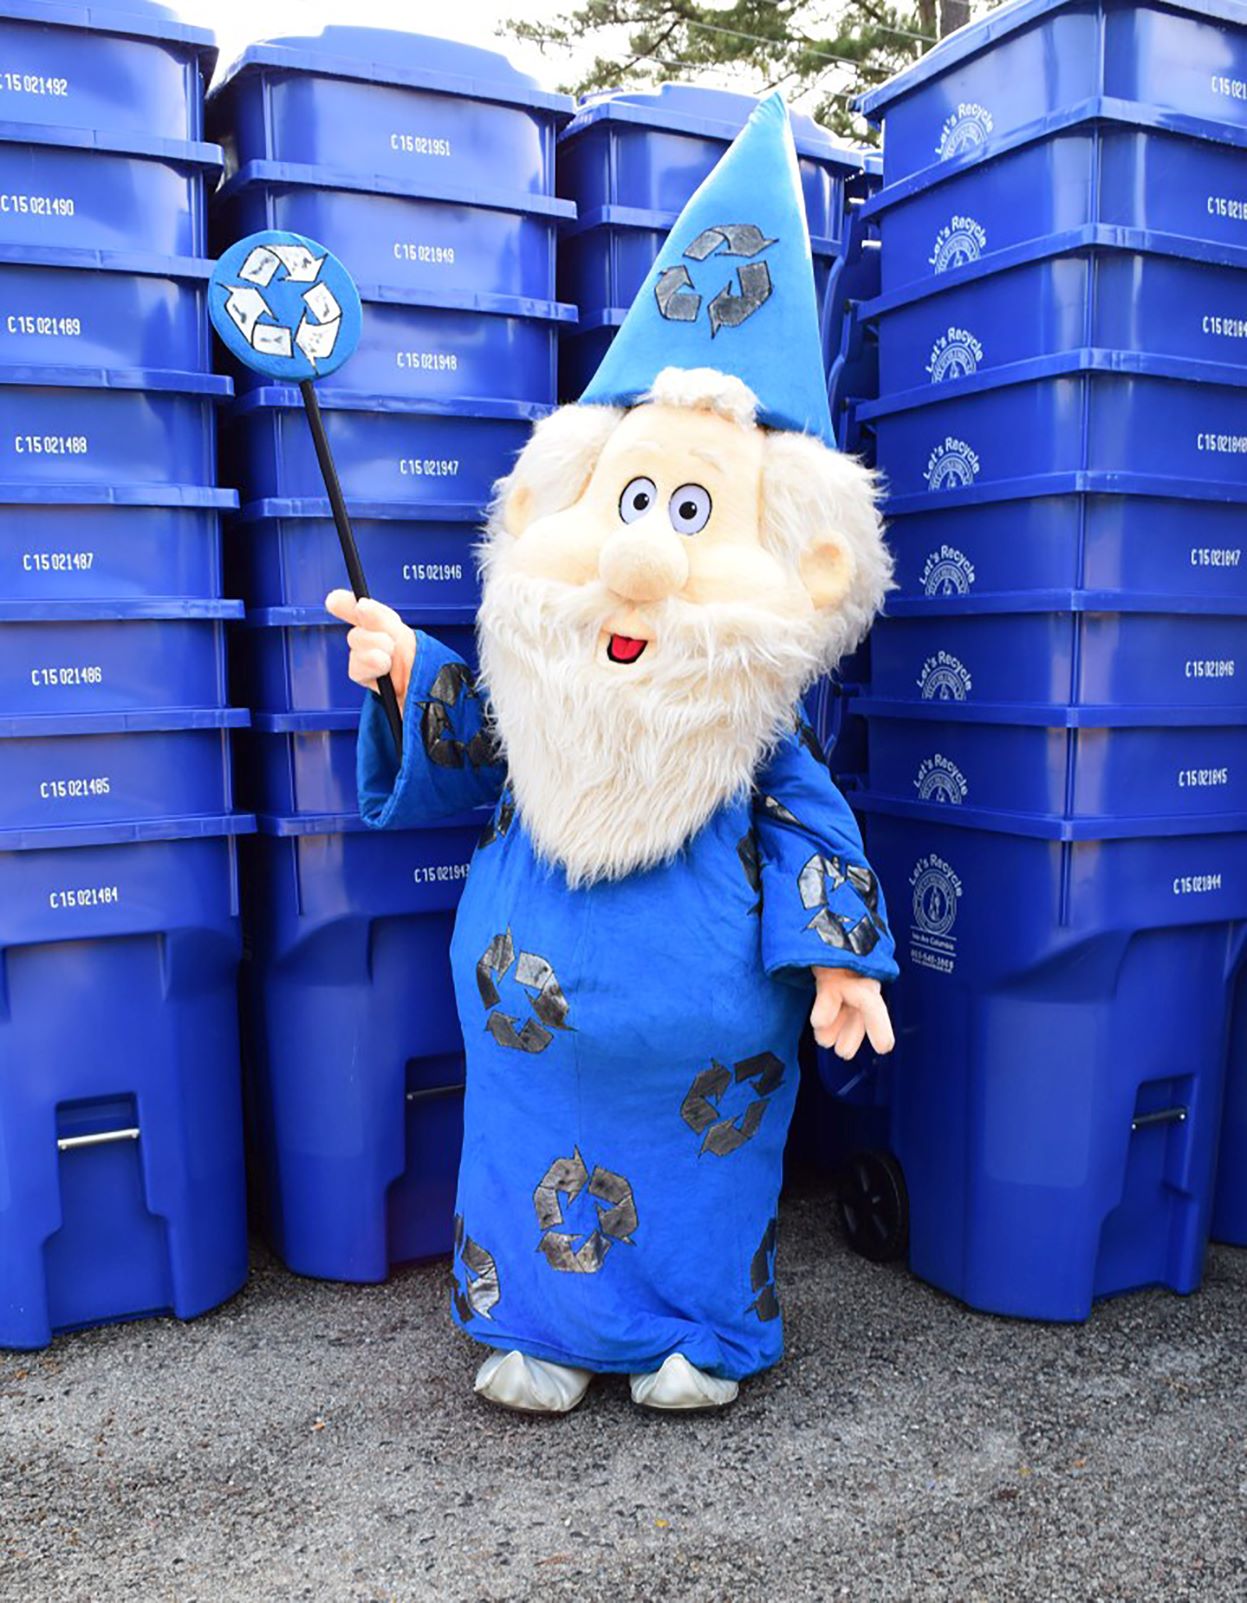 City of Columbia's Waste Wizard